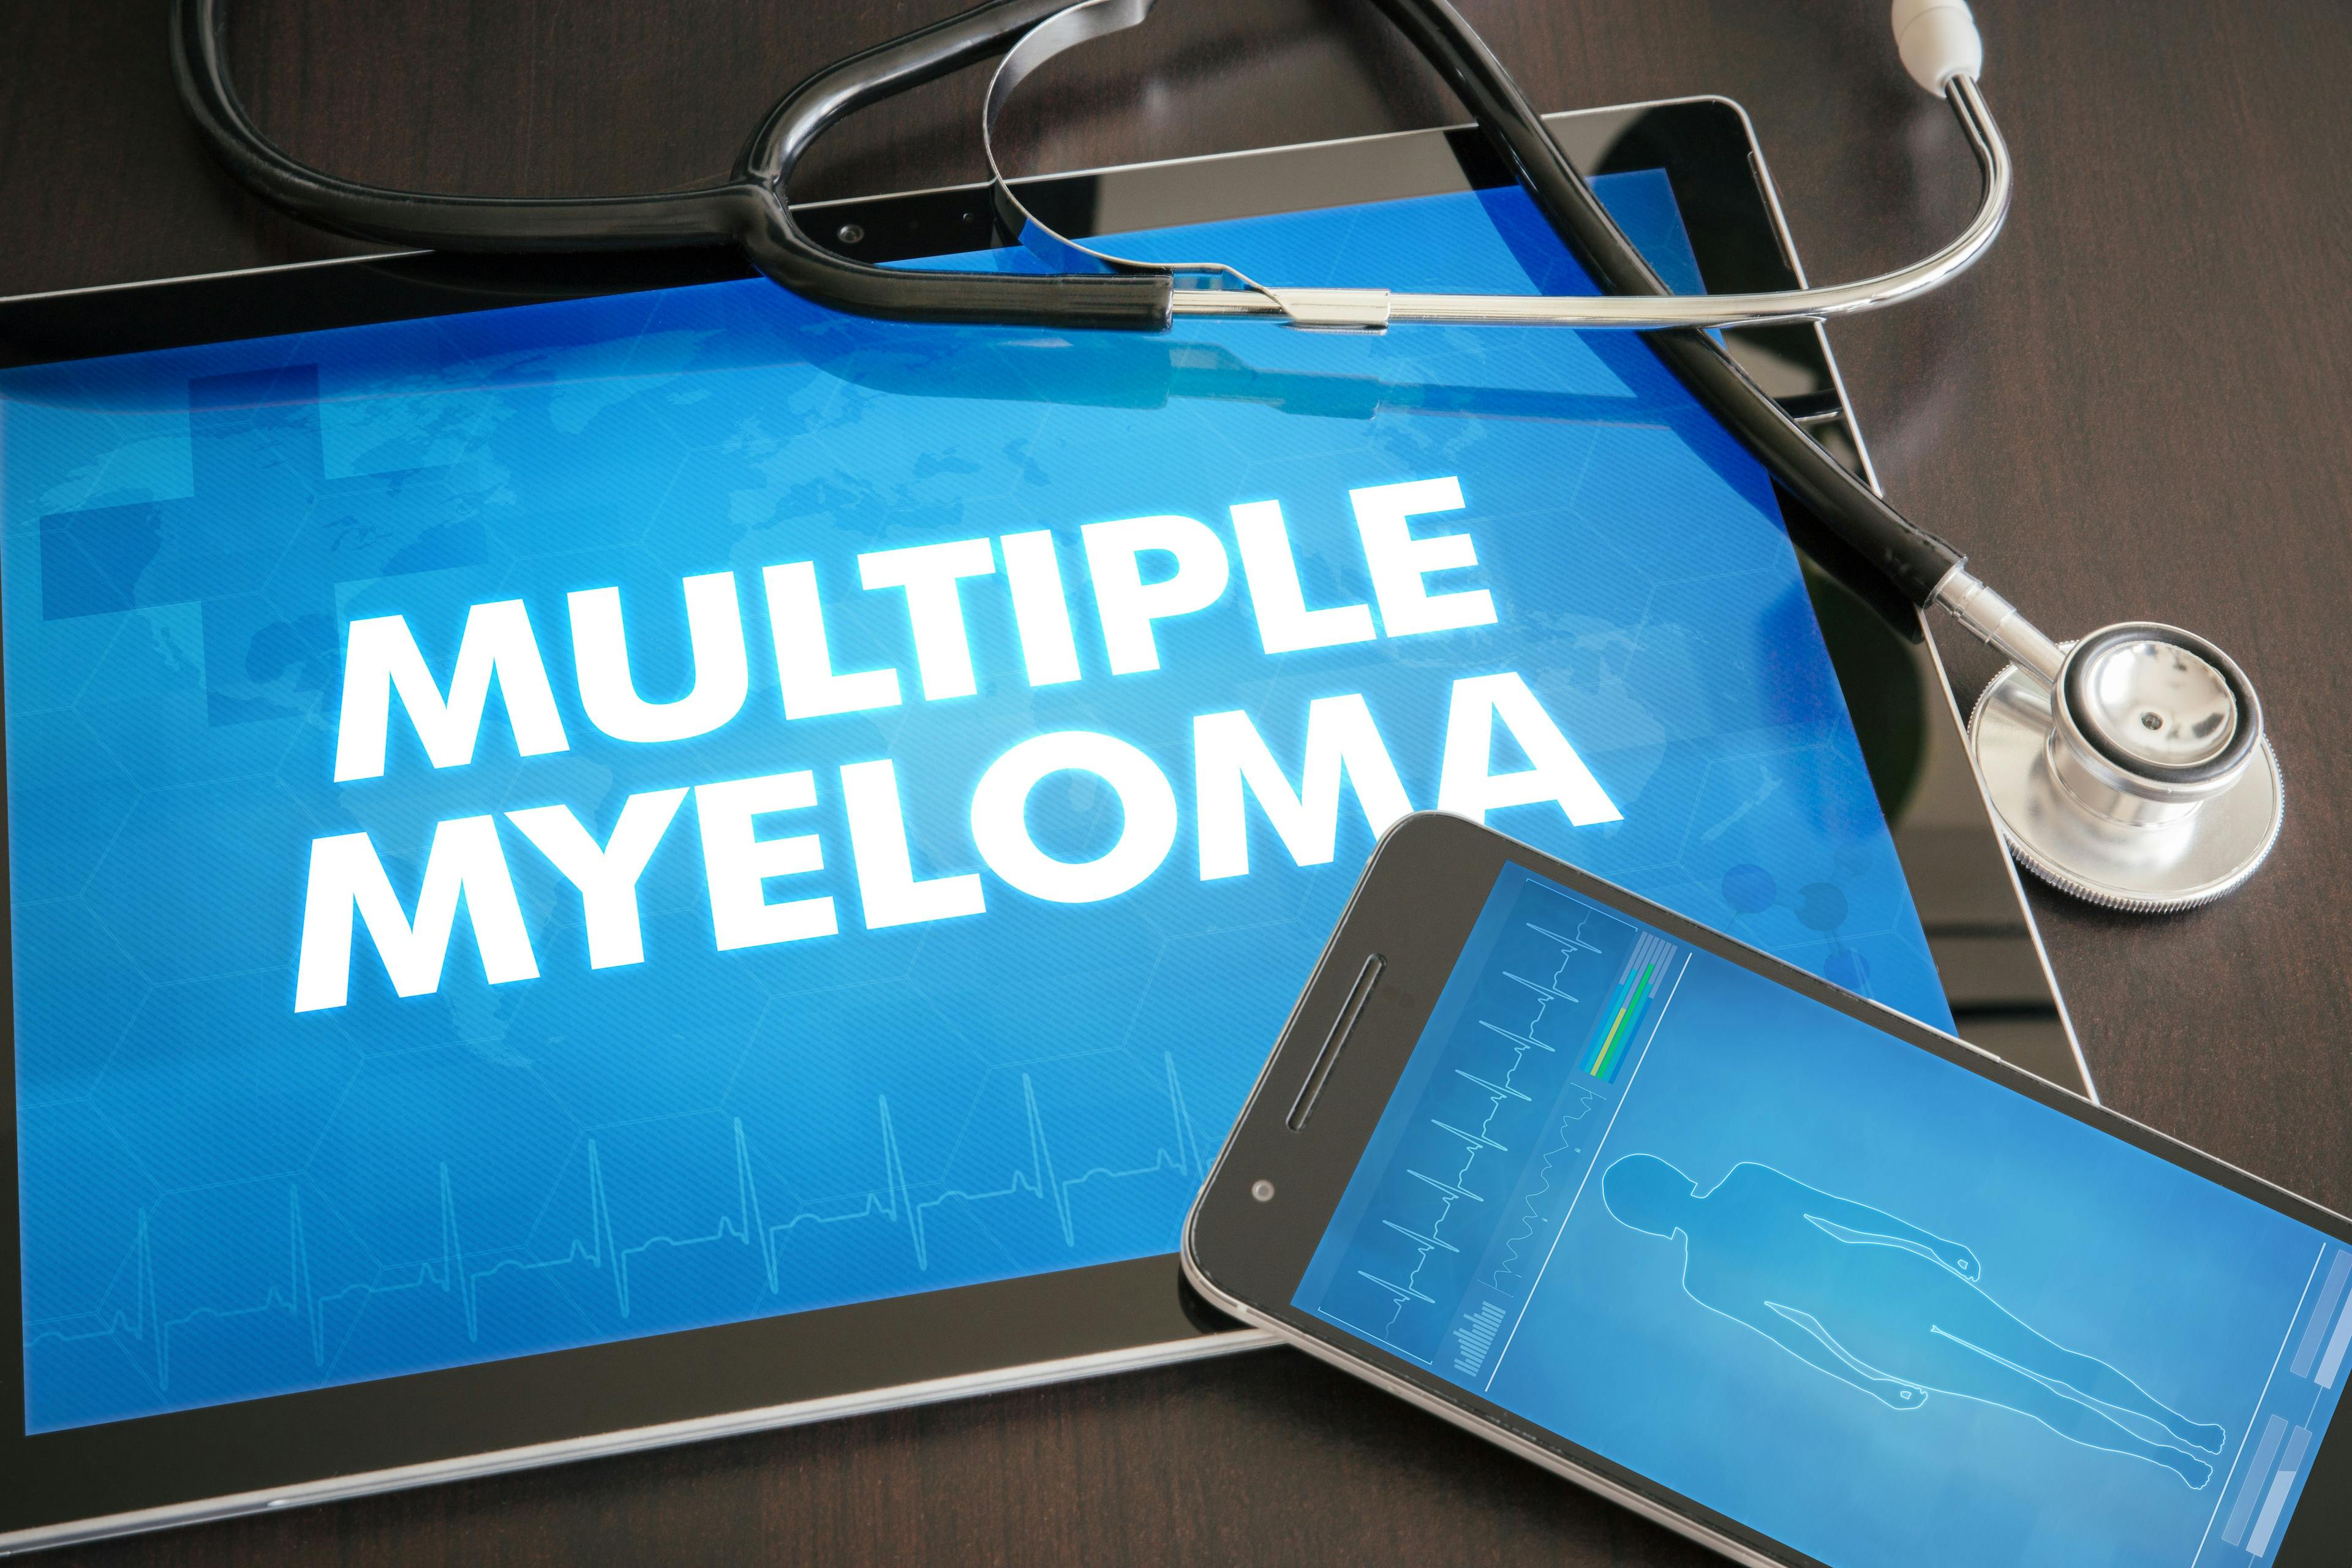 Sarclisa Combination Shows Positive Results in Patients With Relapsed Multiple Myeloma